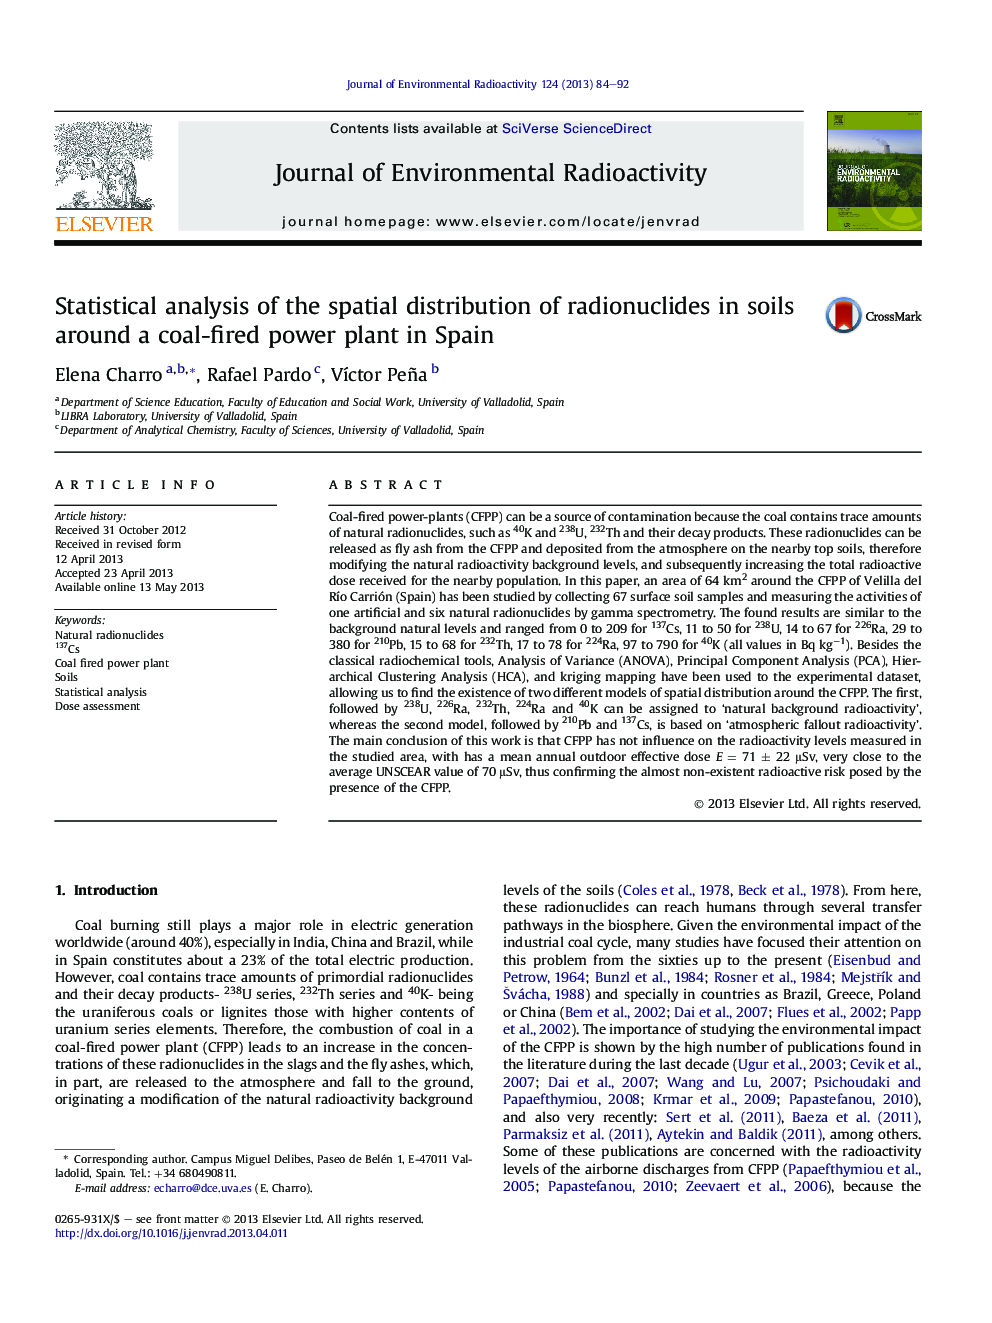 Statistical analysis of the spatial distribution of radionuclides in soils around a coal-fired power plant in Spain